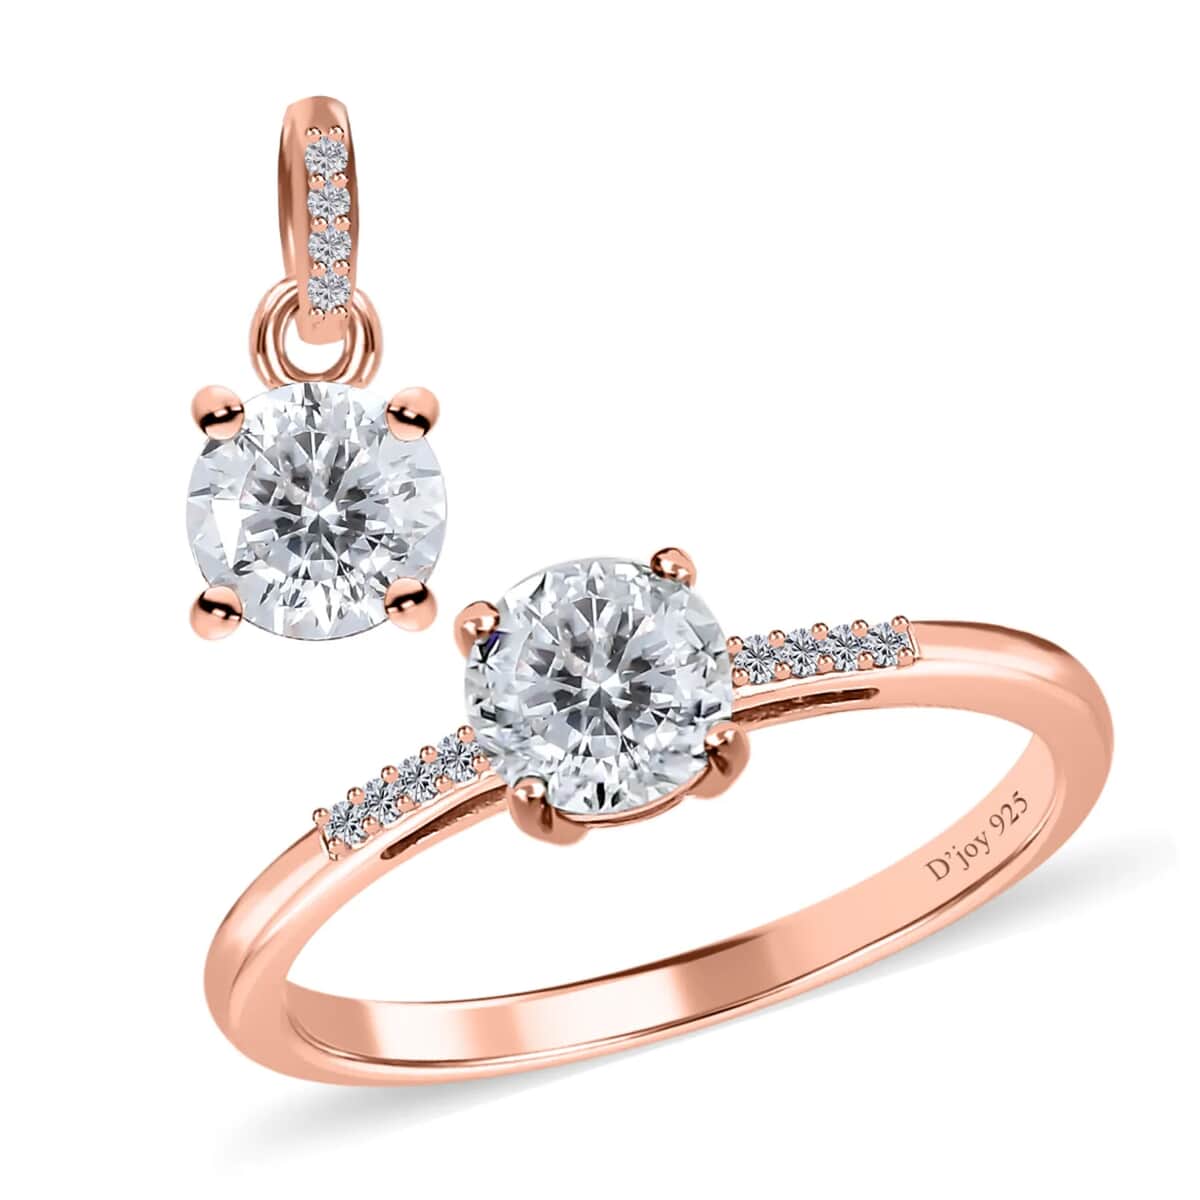 100 Facets Moissanite 1.65 ctw Solitaire Ring and Pendant Set in Vermeil Rose Gold Over Sterling Silver, Moissanite Solitaire Ring, Jewelry Set For Her (Size 6.00) image number 0